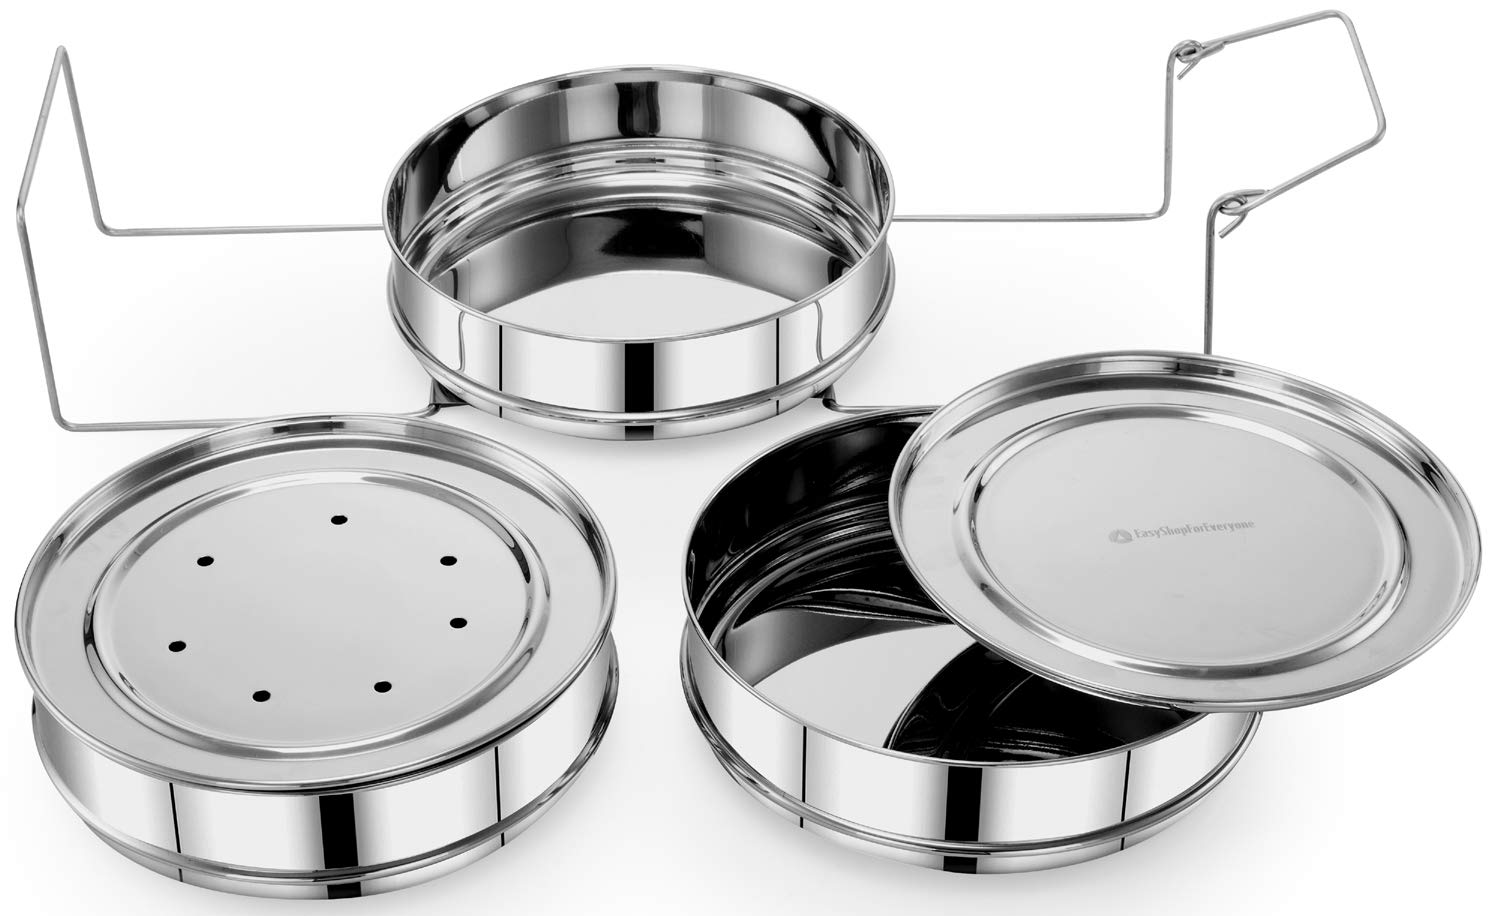 Extorn Stackable Steamer Insert Pans for Instant Pot 6 qt/8 qt/5 qt  Electric Pressure Cooker Accessories Duo/multi/2-Tier Stainless Steel  Instant Pots